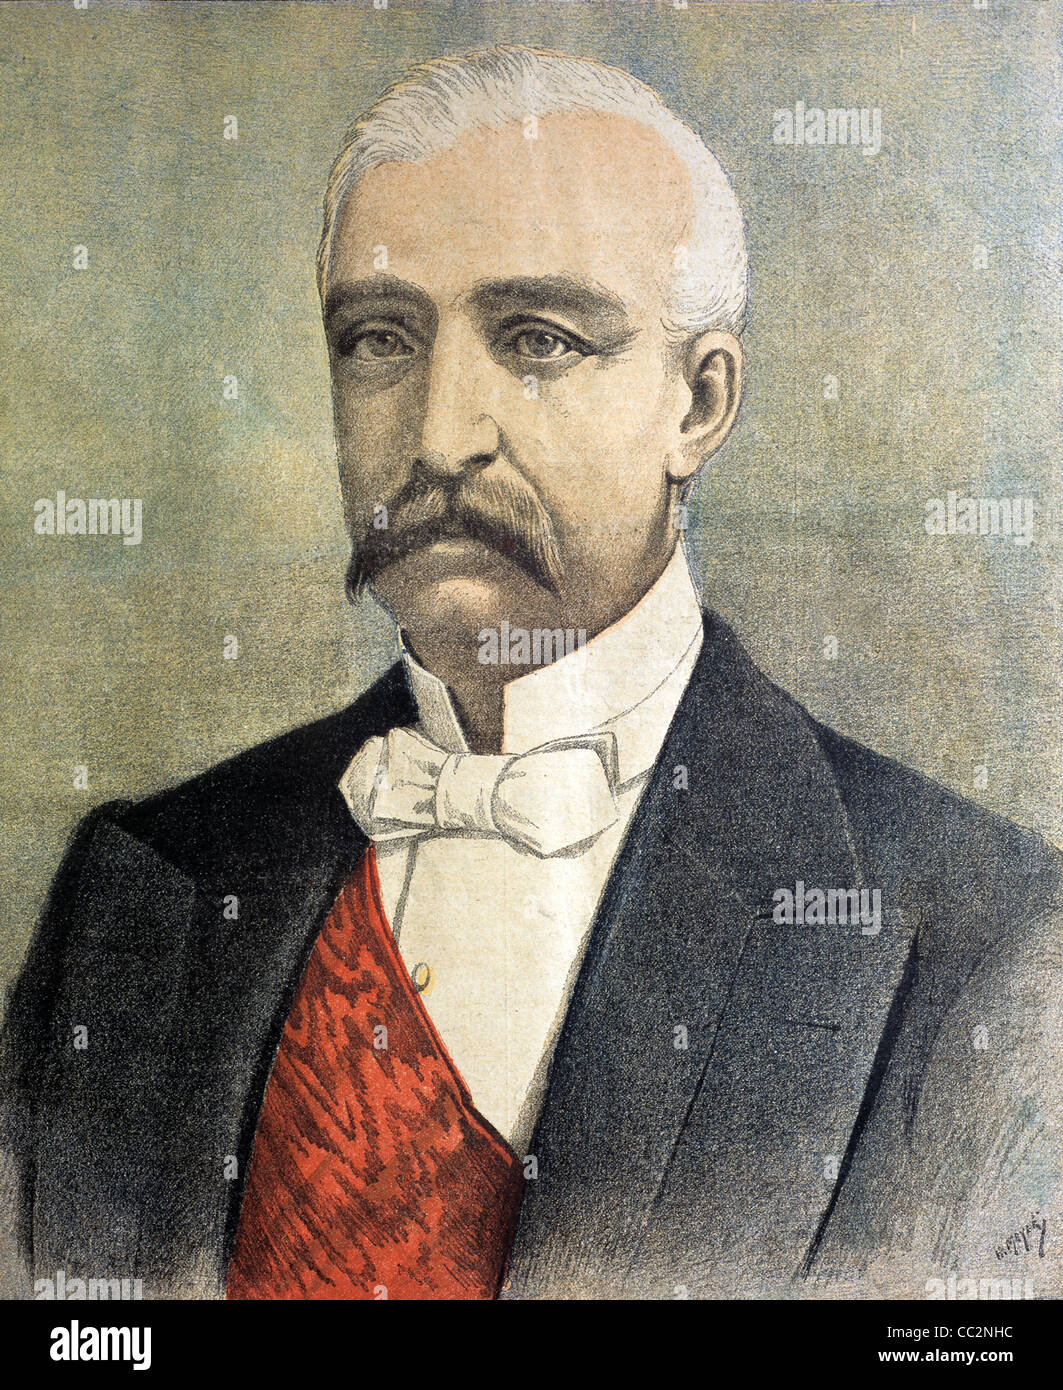 Portrait of Félix Faure (1841-1899) Seventh President of France (1895-99) During Third Republic. Vintage Illustration or Engraving Stock Photo